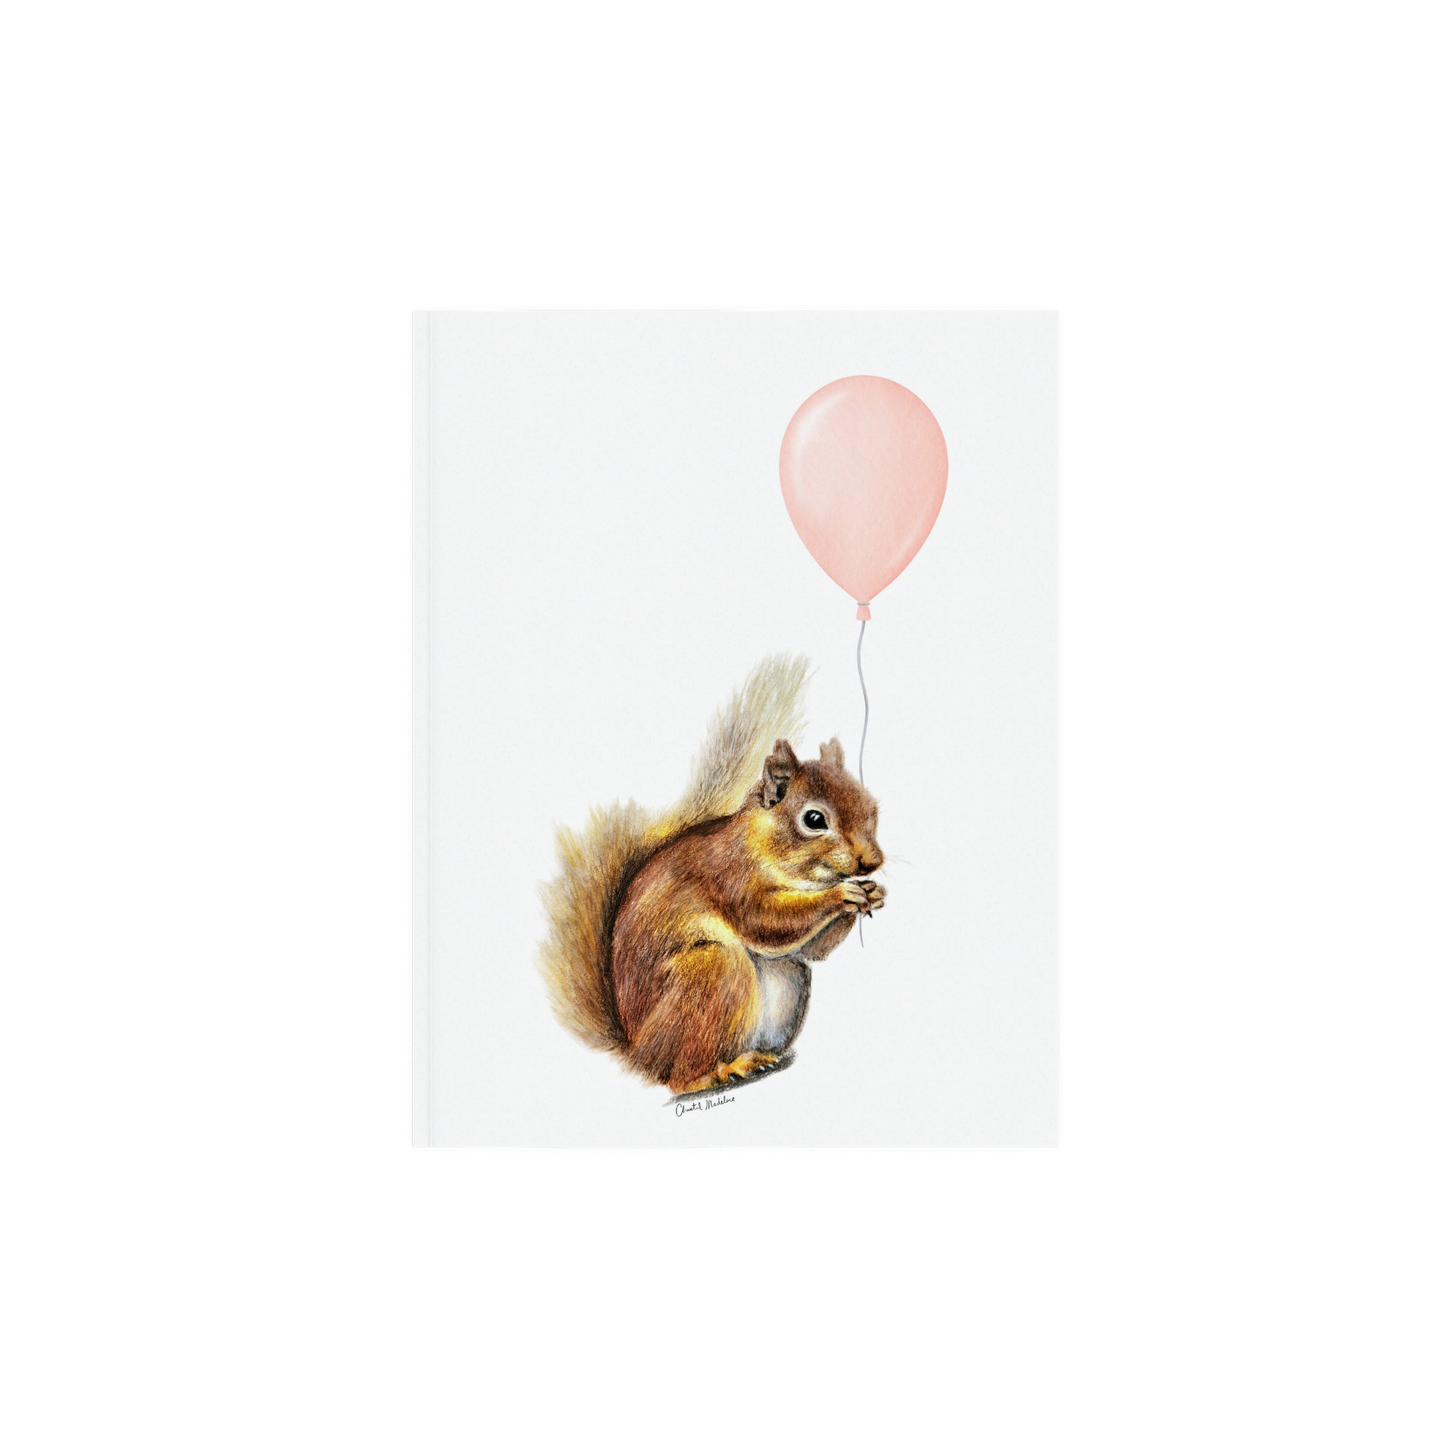 Squirrel With Coral Balloon, Woodland nursery art, Giclee print on fine art paper